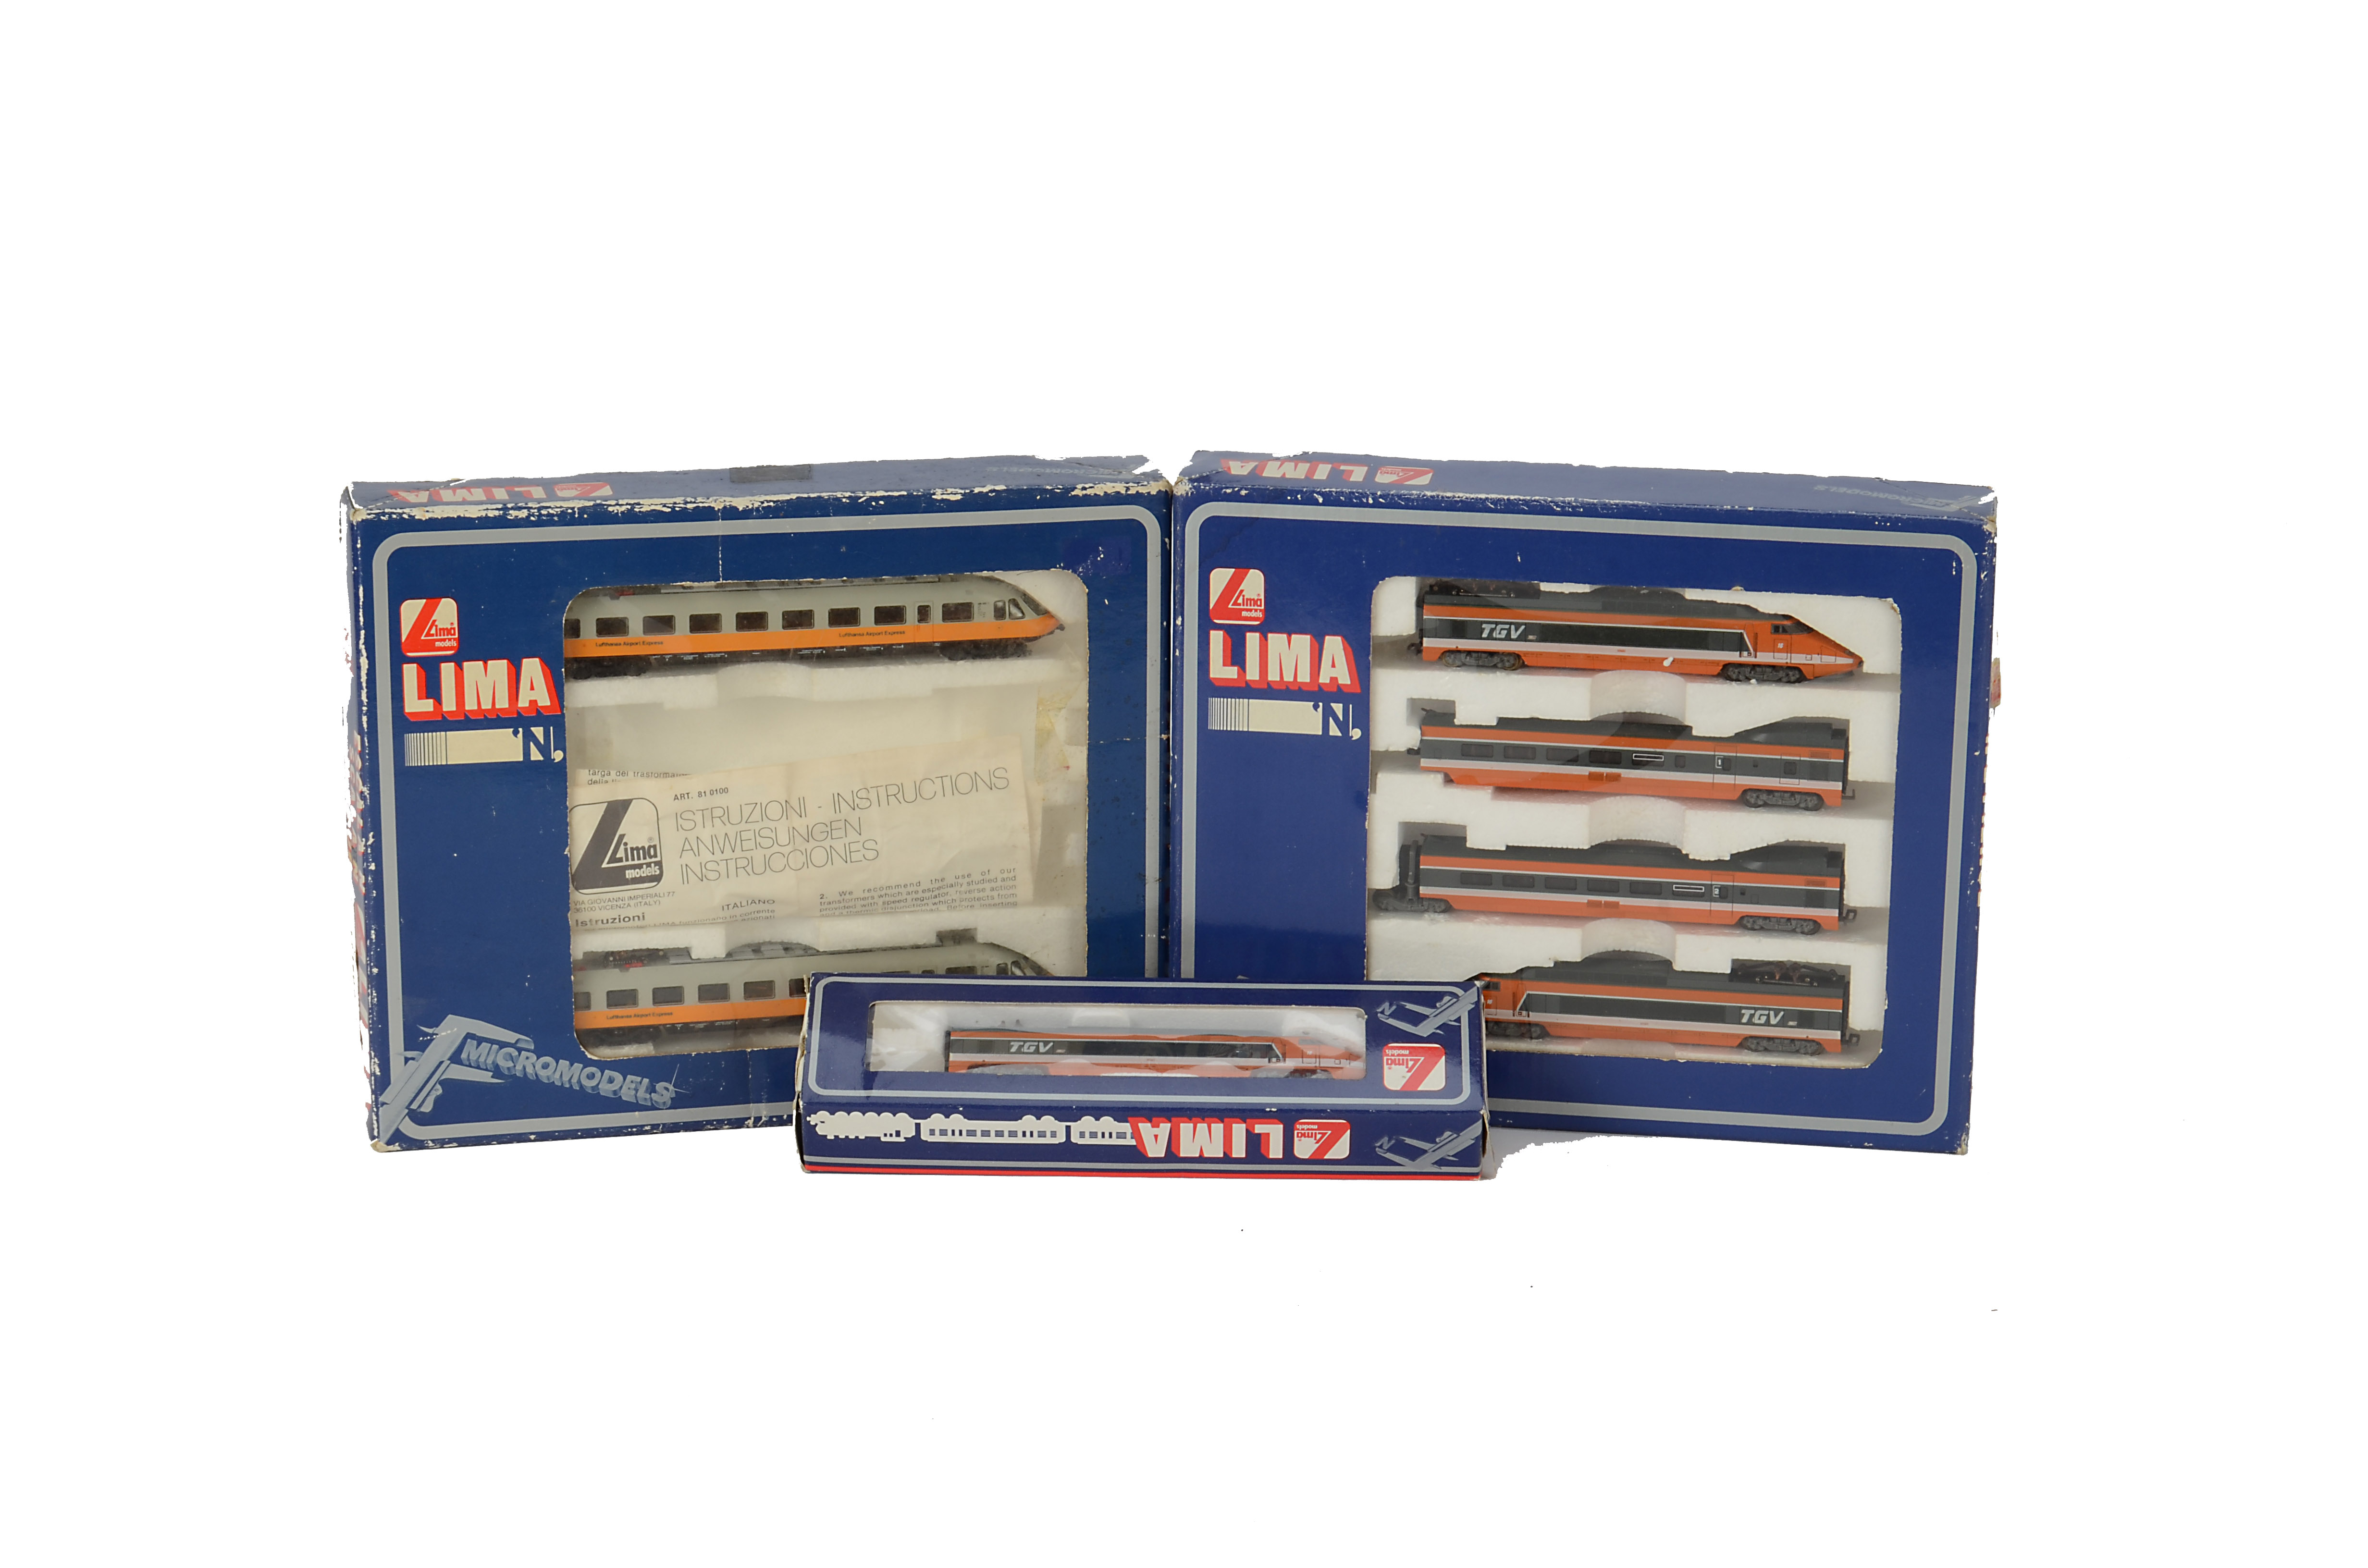 Continental N Gauge Trains by Lima, comprising a 4-car 'TGV' train pack in orange/grey livery, an